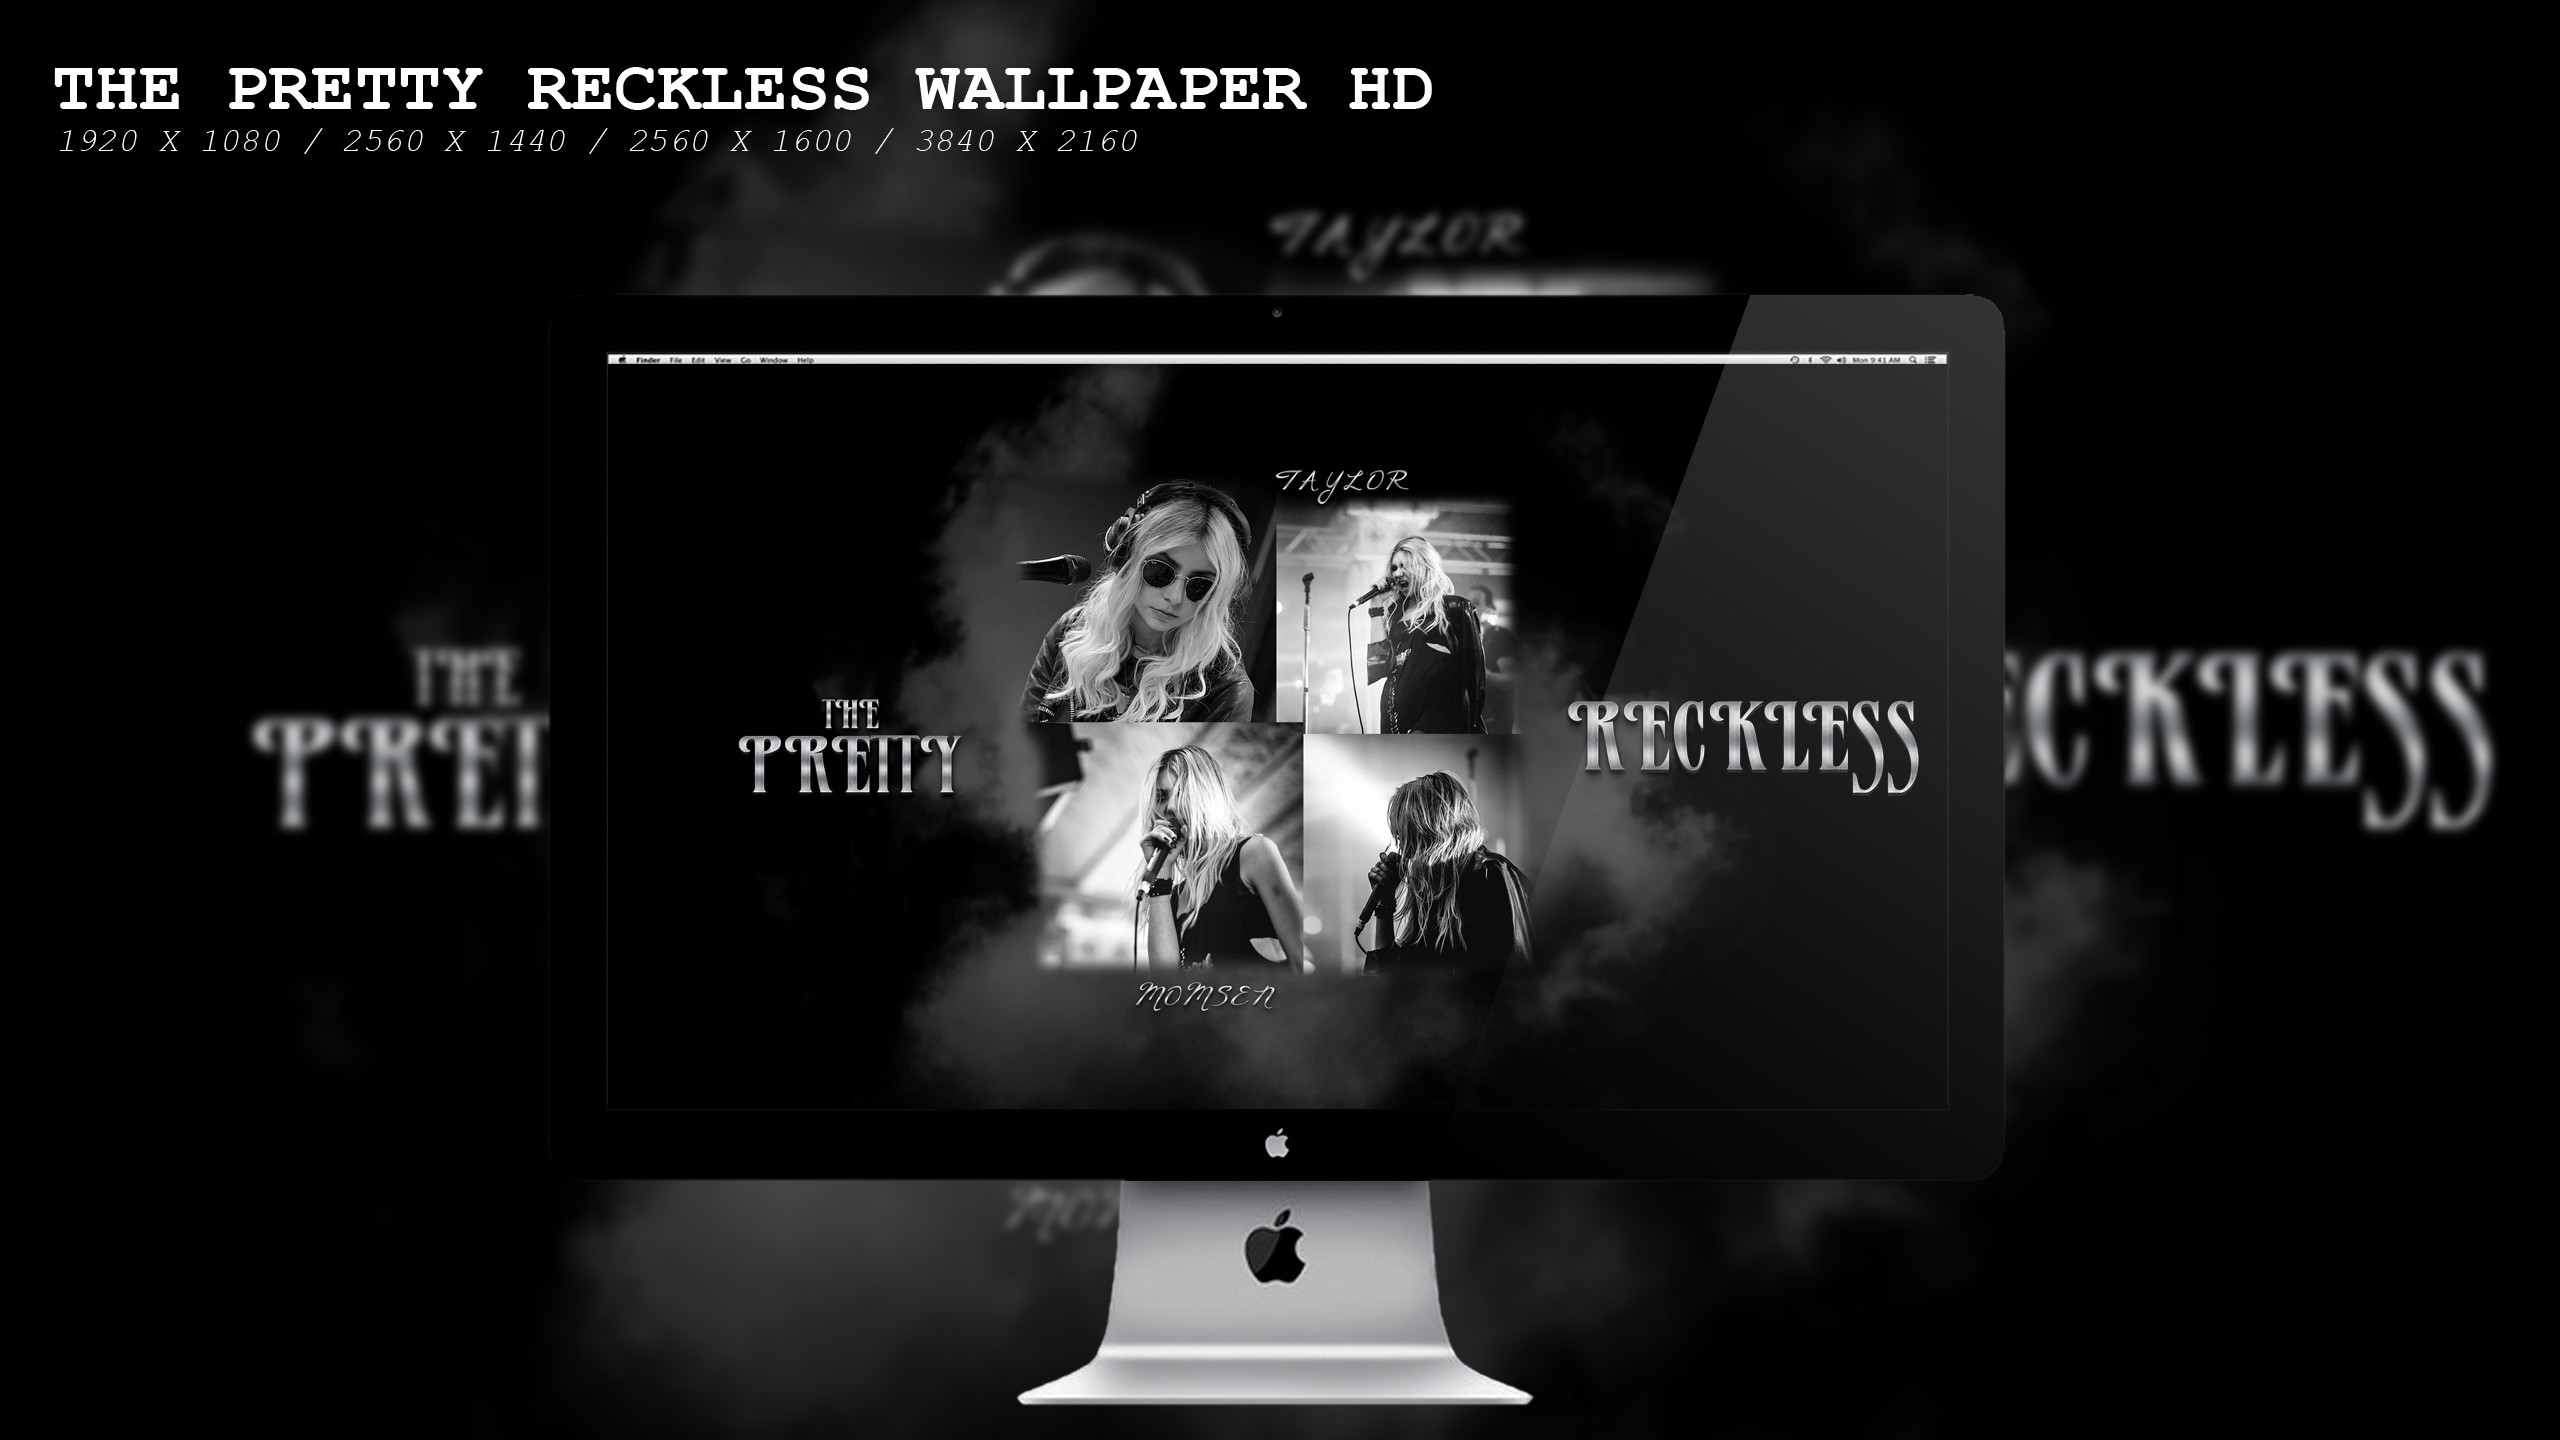 2560x1440 ... The Pretty Reckless Wallpaper HD by BeAware8